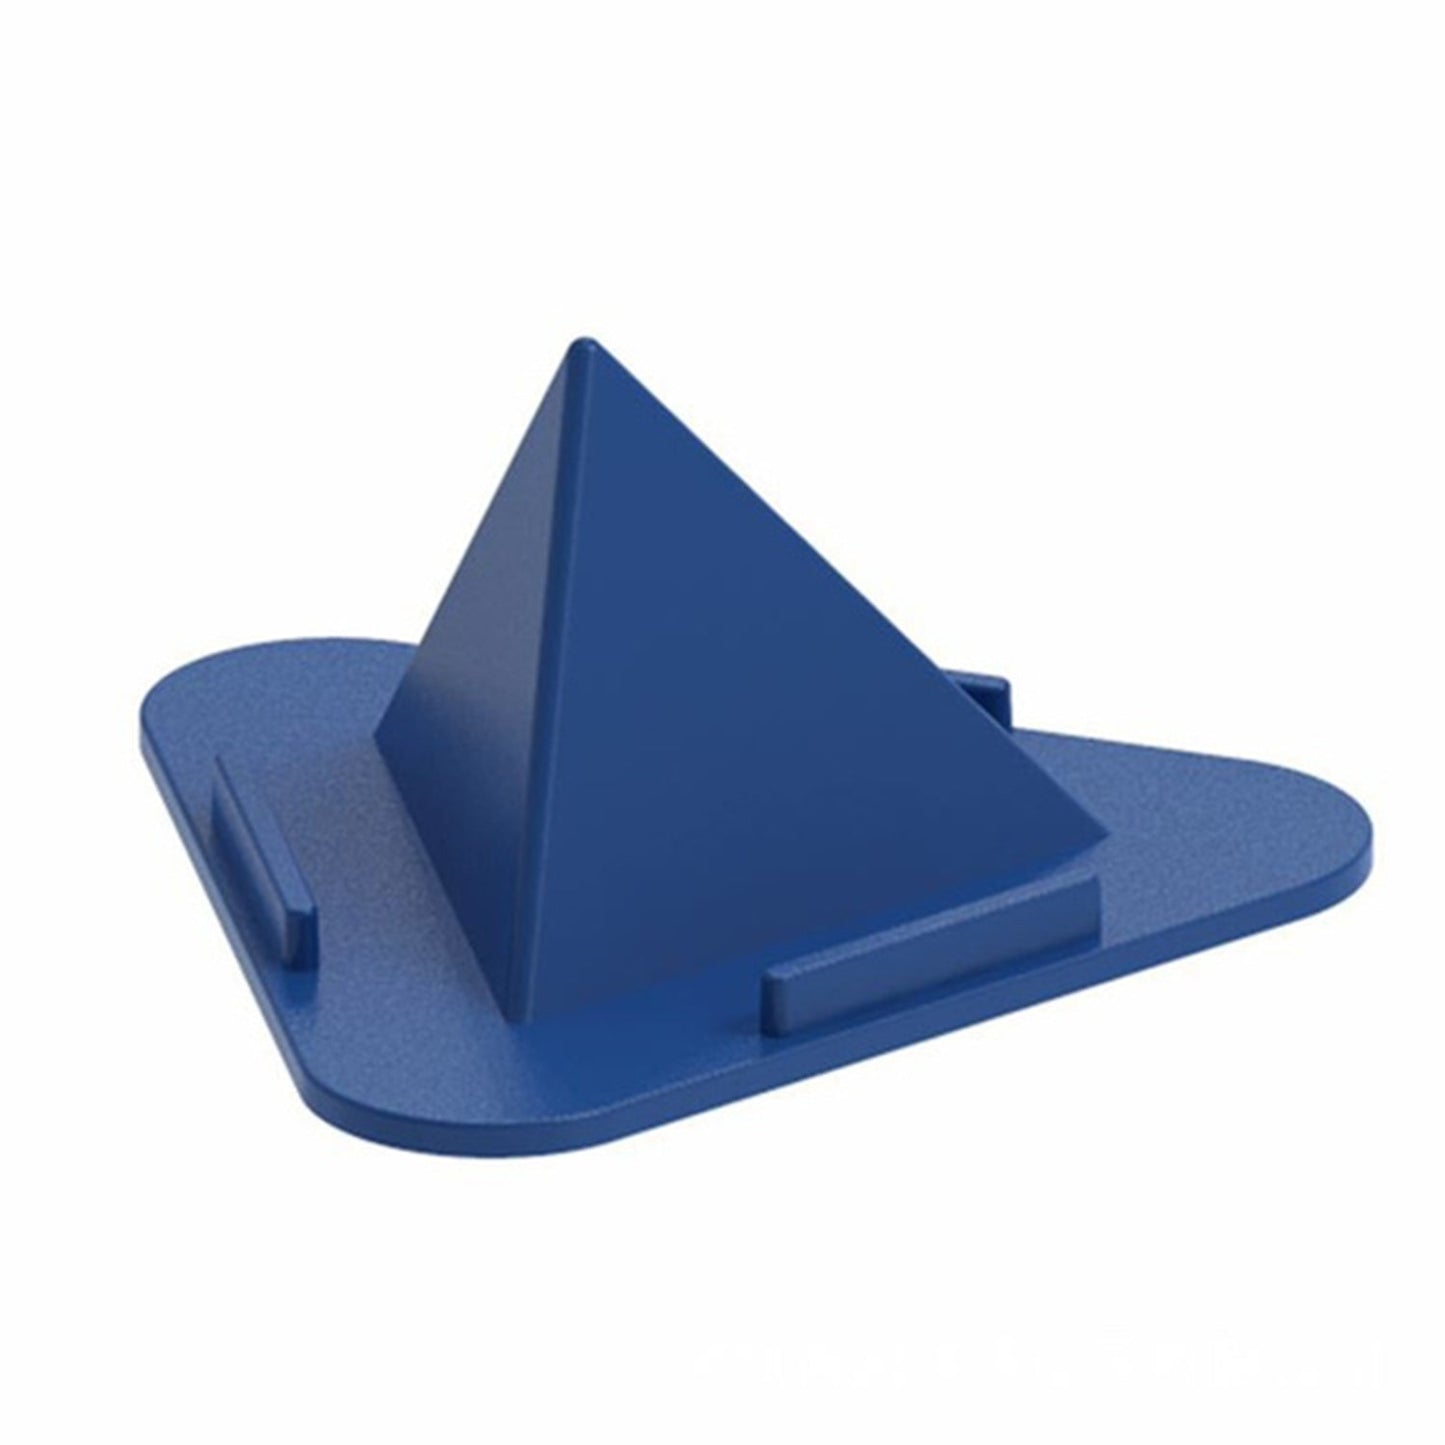 4615 Pyramid Mobile Stand with 3 Different Inclined Angles Dukandaily